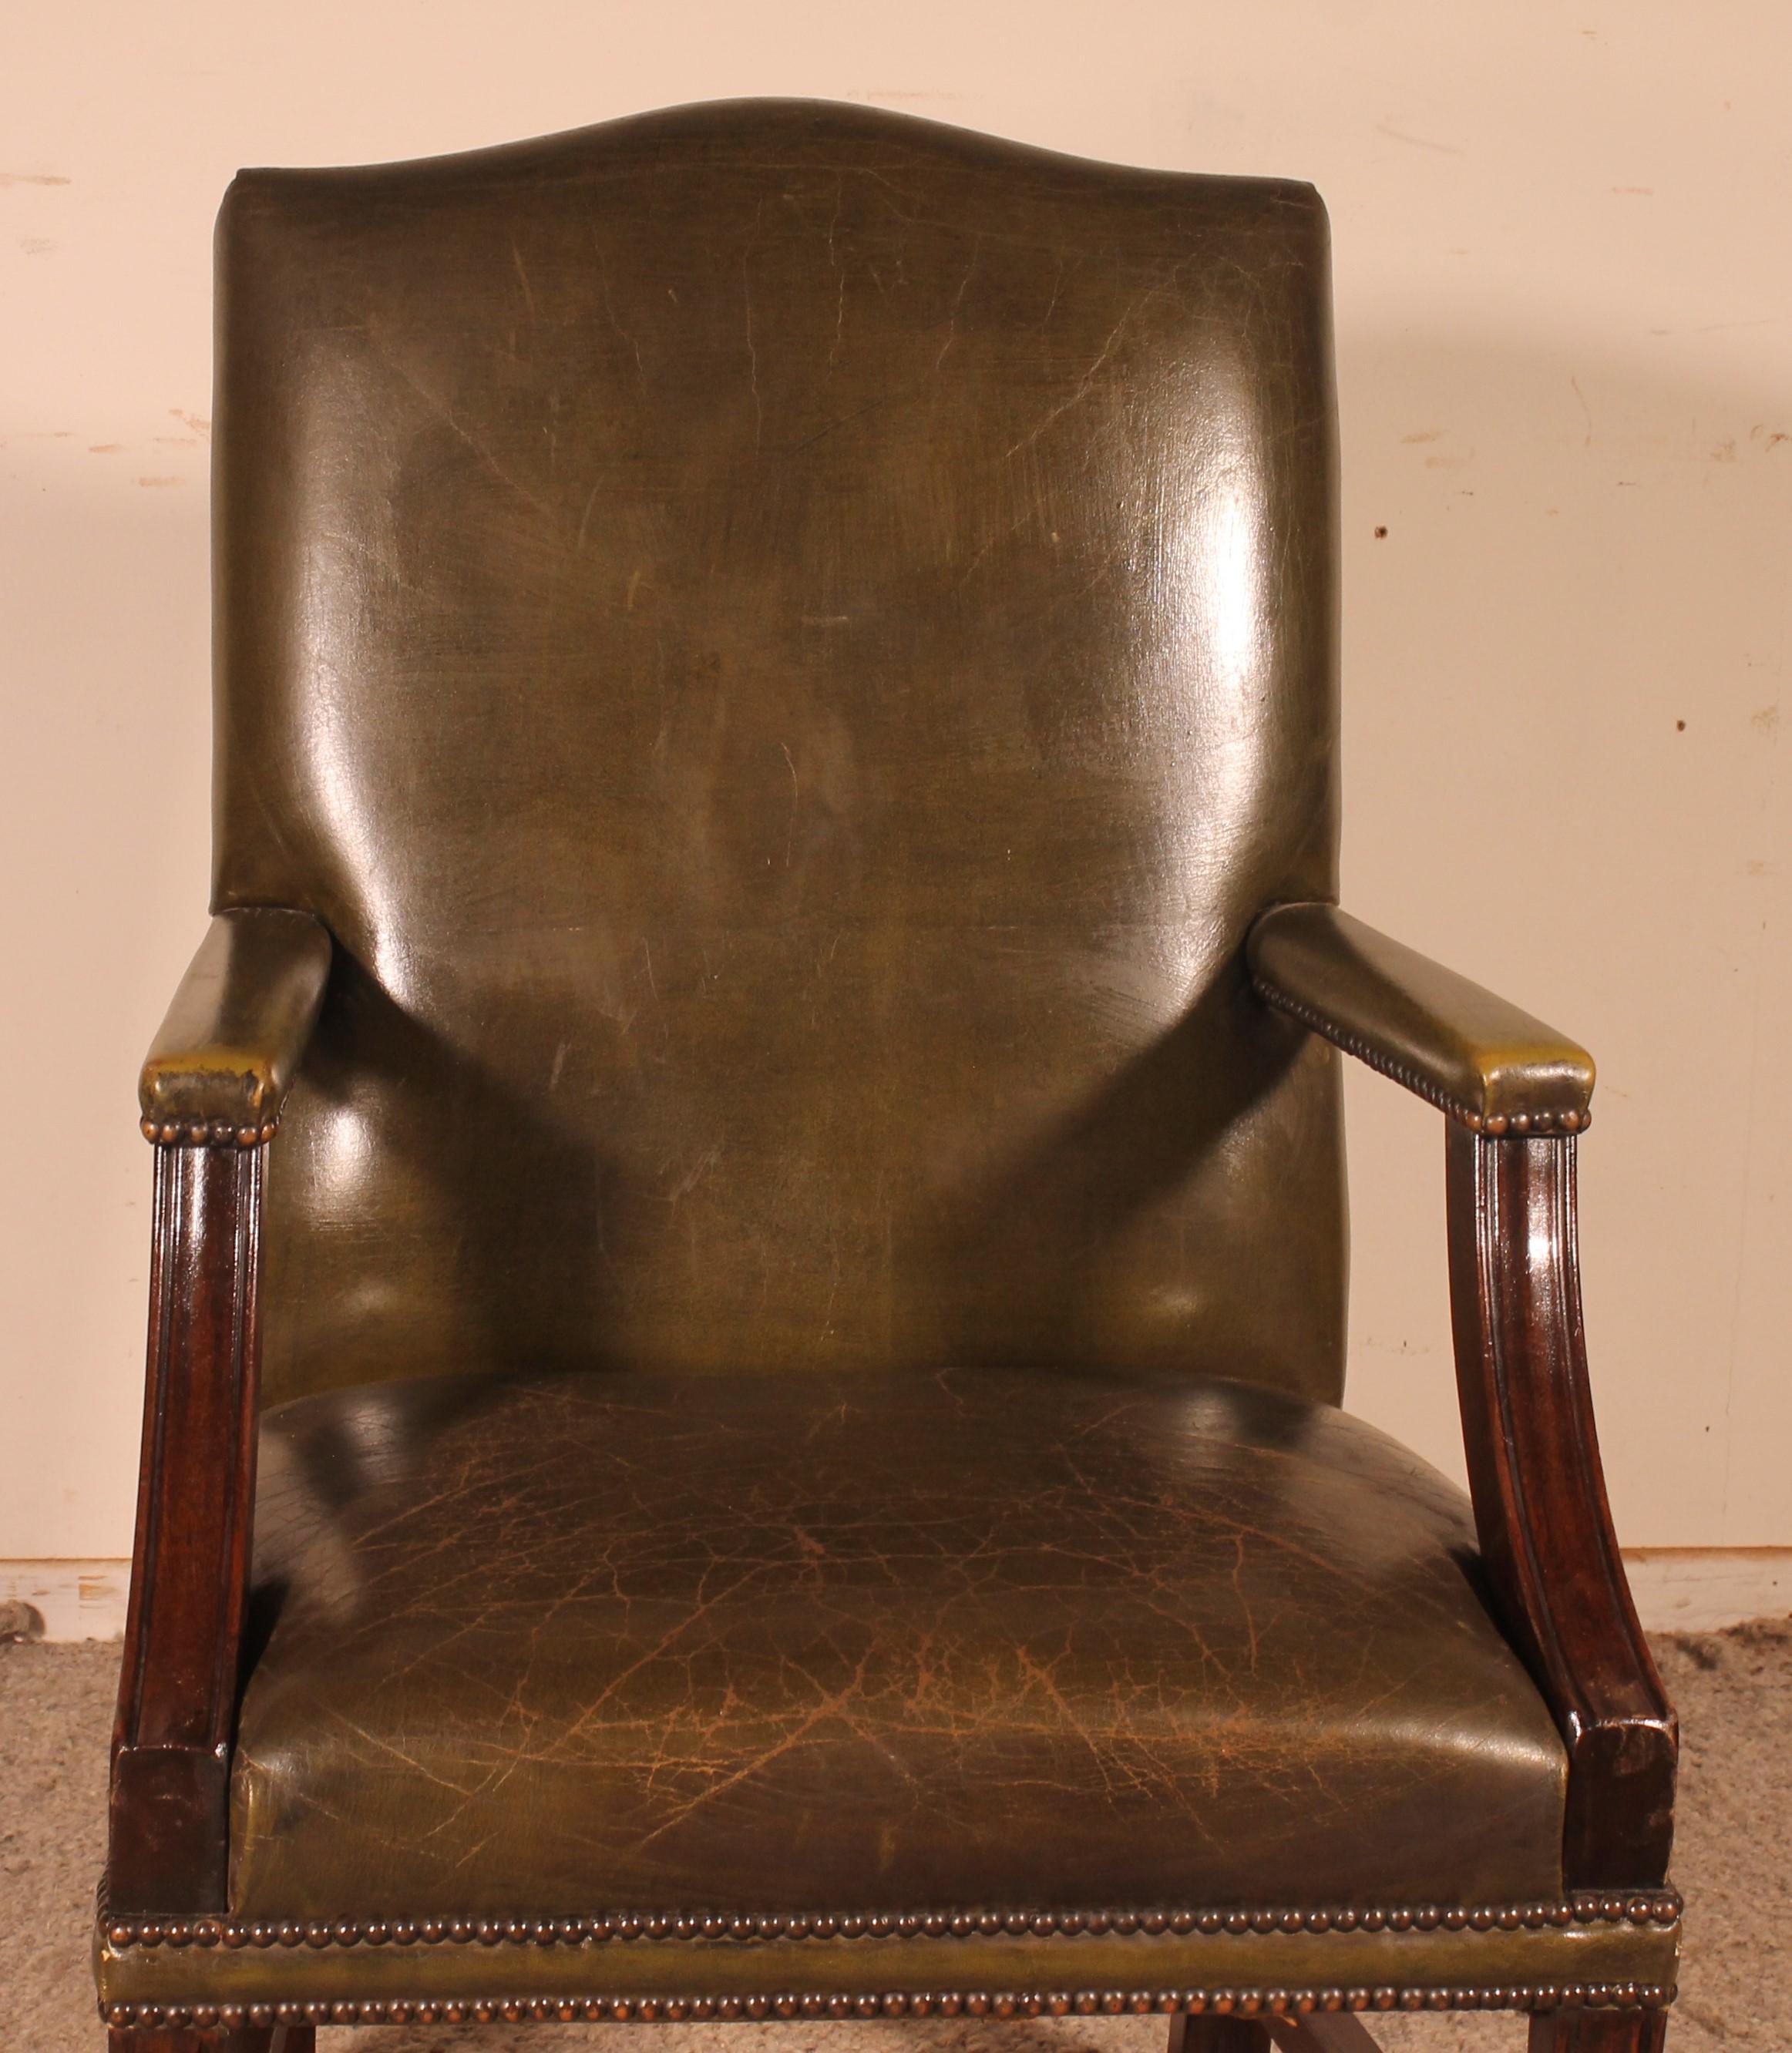 Very beautiful English leather armchair with a mahogany base

Very beautiful armchair covered with green leather which has a very beautiful patina
The armchair rests on a solid mahogany base
Very comfortable.
It can be used as a lounge chair or desk